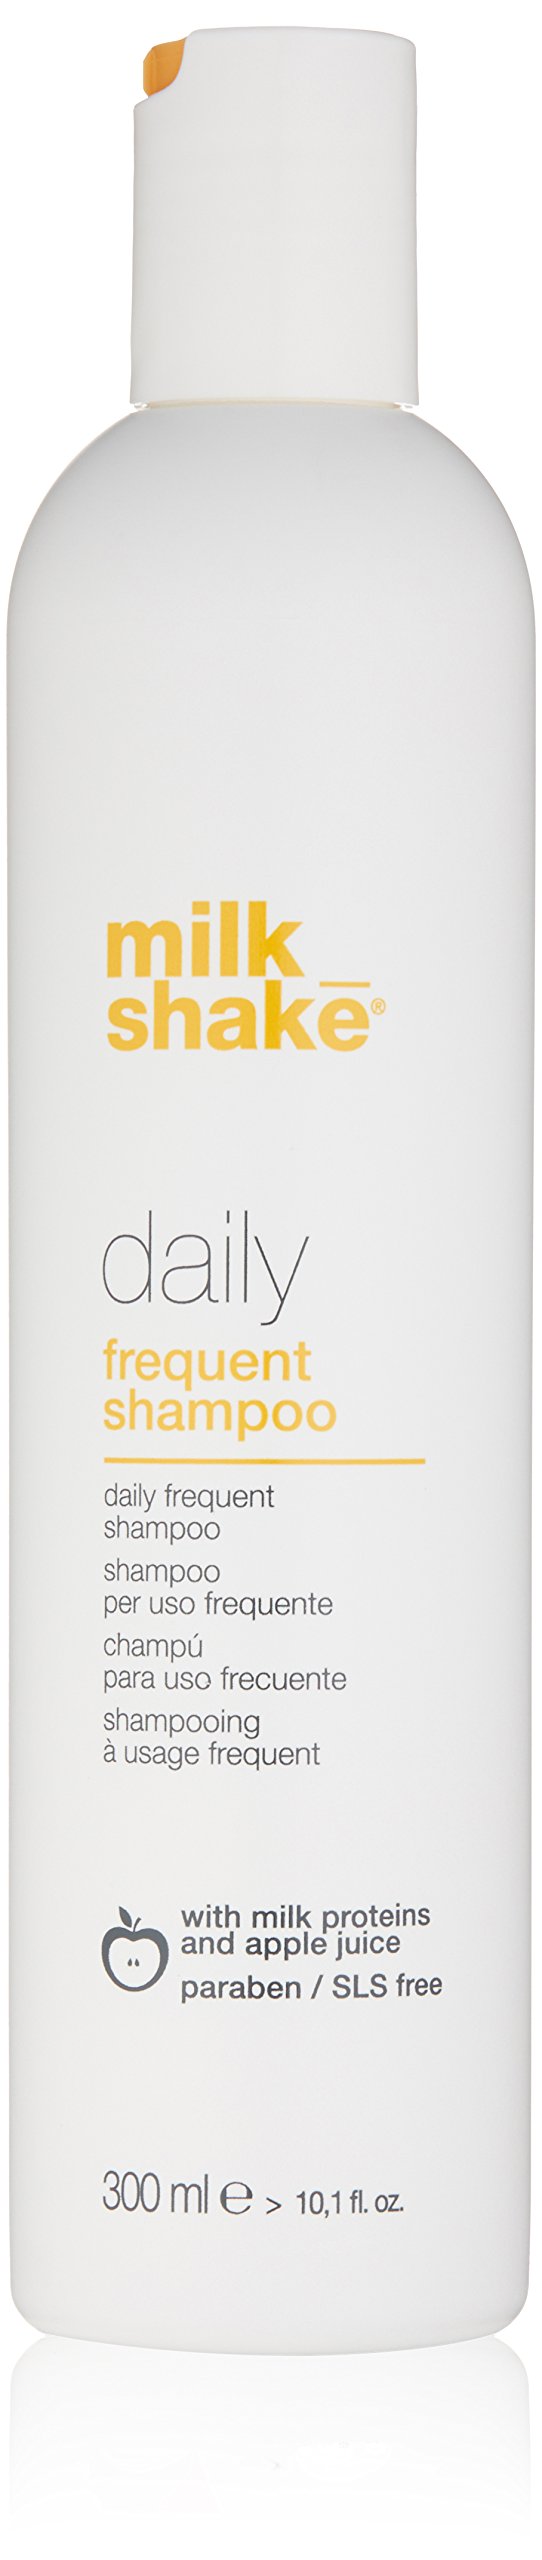 milk_shake Daily Frequent Shampoo 10.1 Fl Oz (Pack of 1)